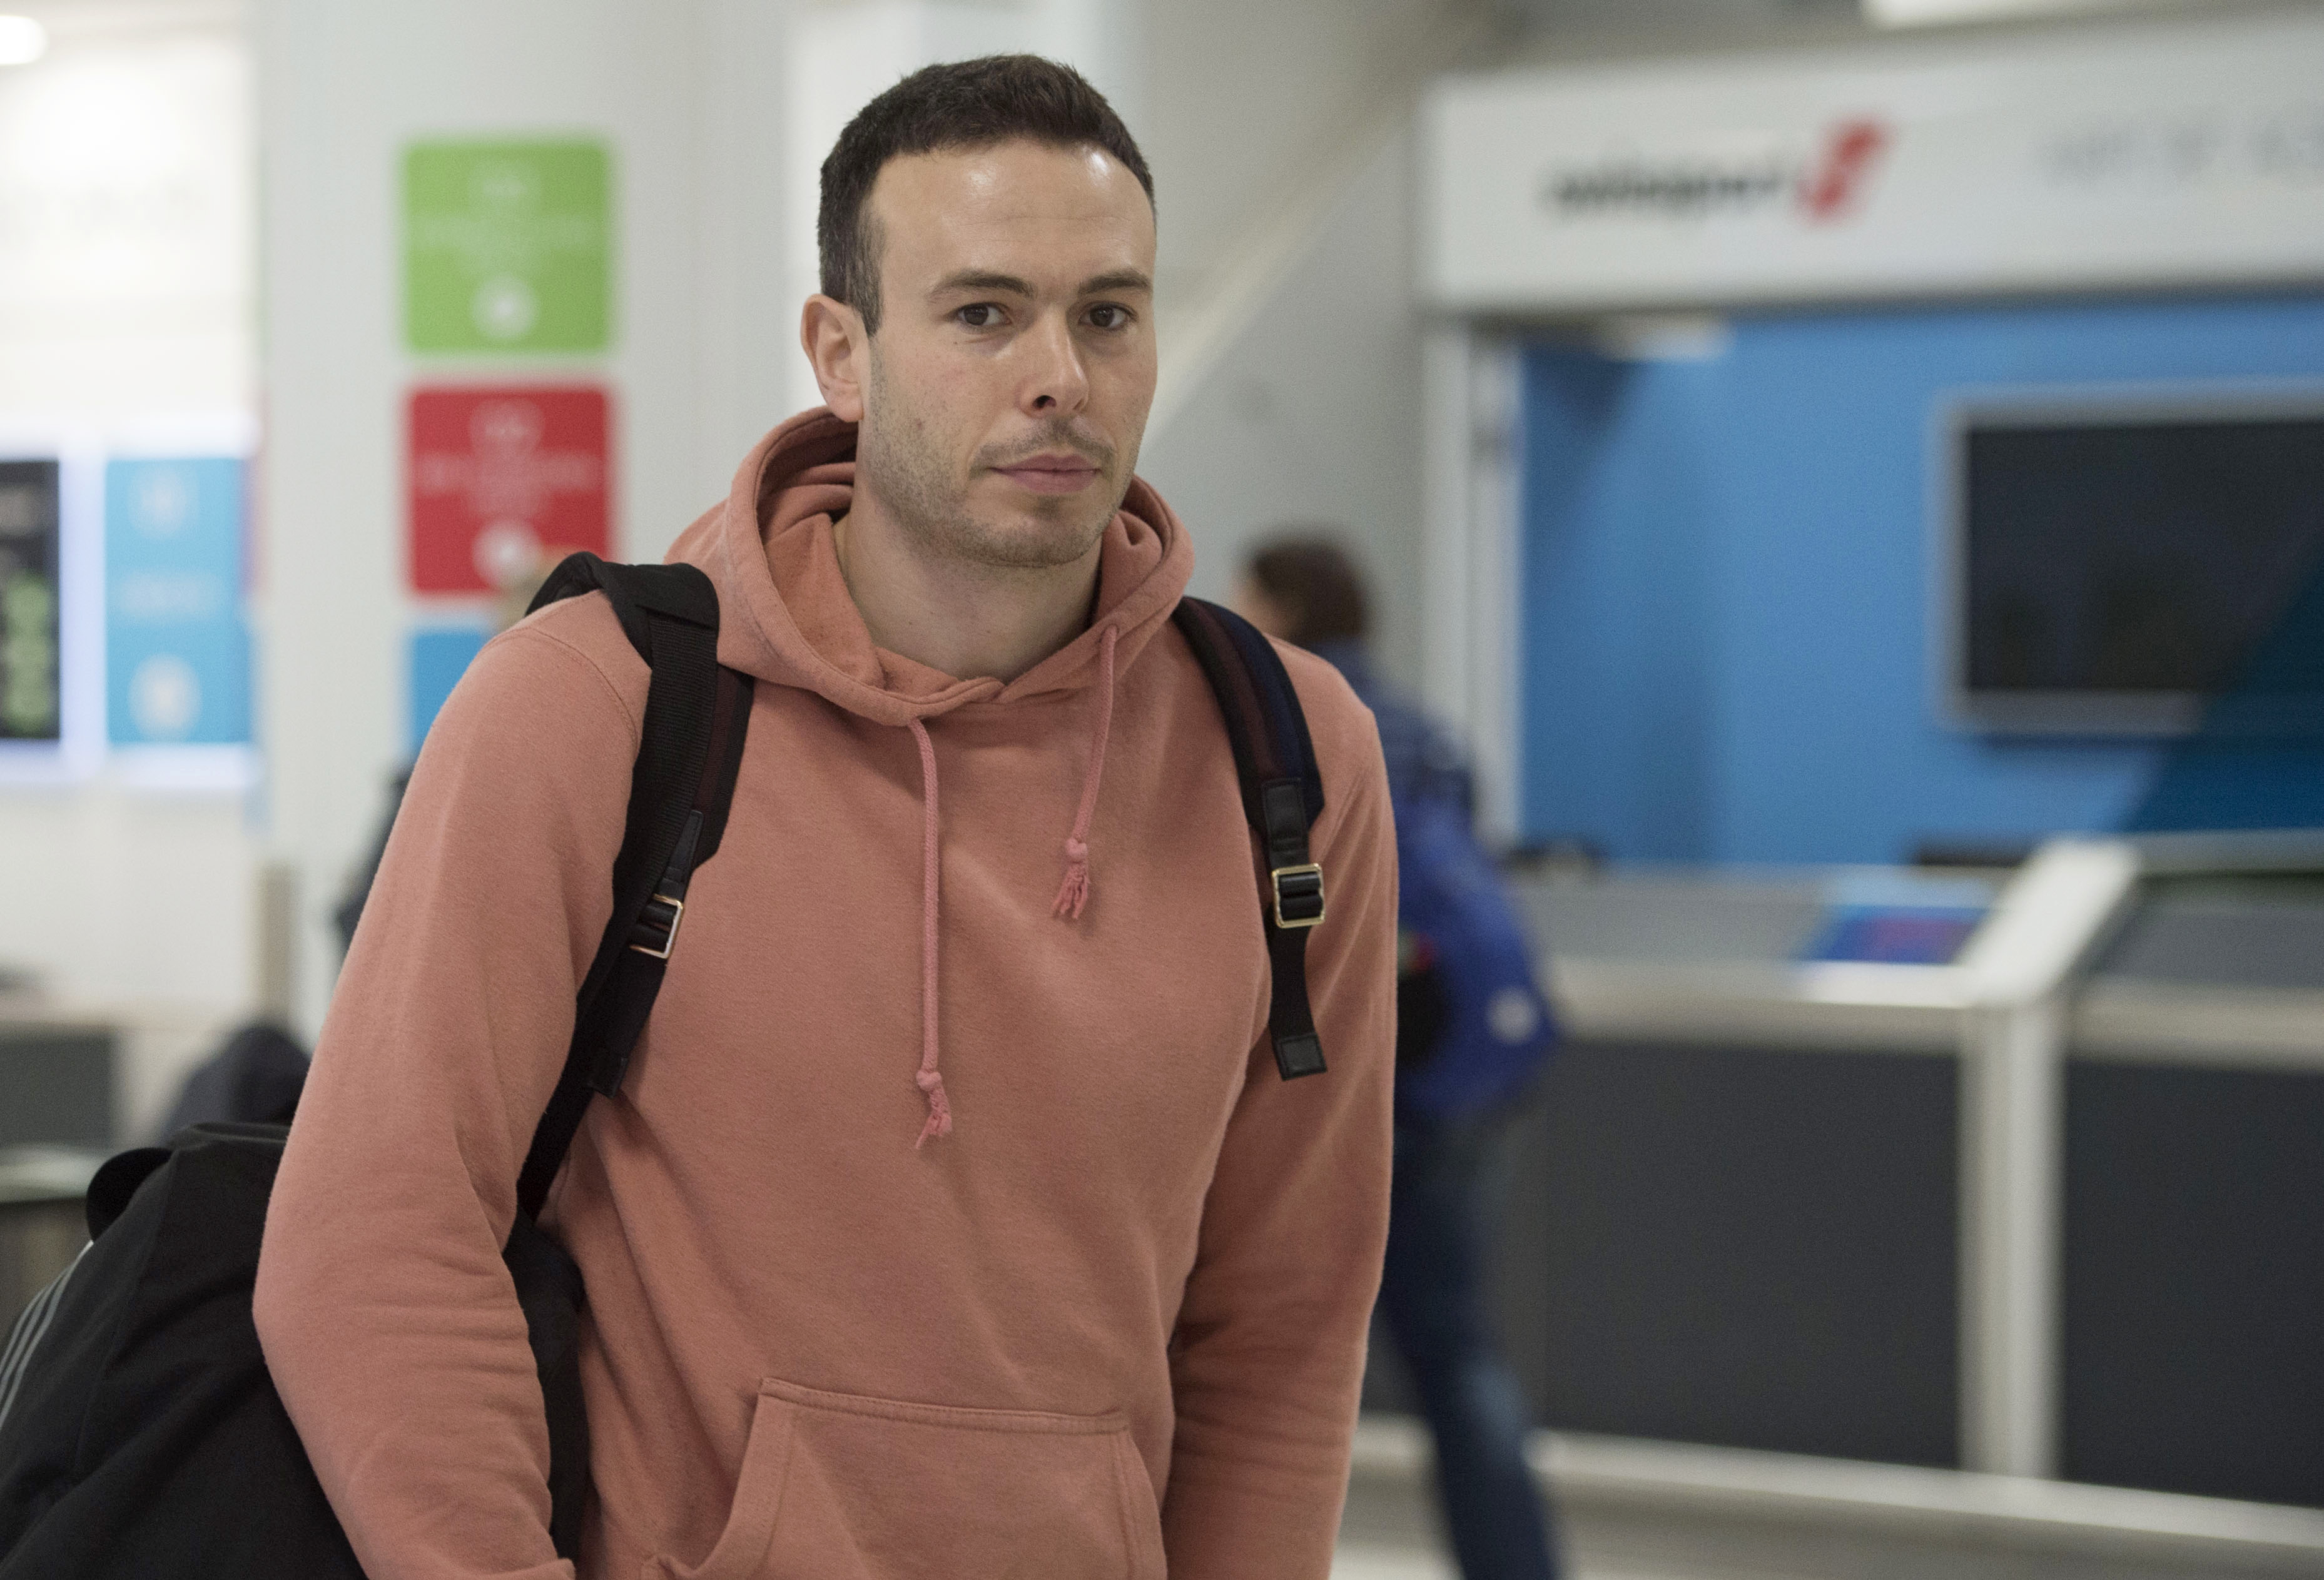 Aberdeen's Andy Considine and his team-mates flew out to Dubai yesterday